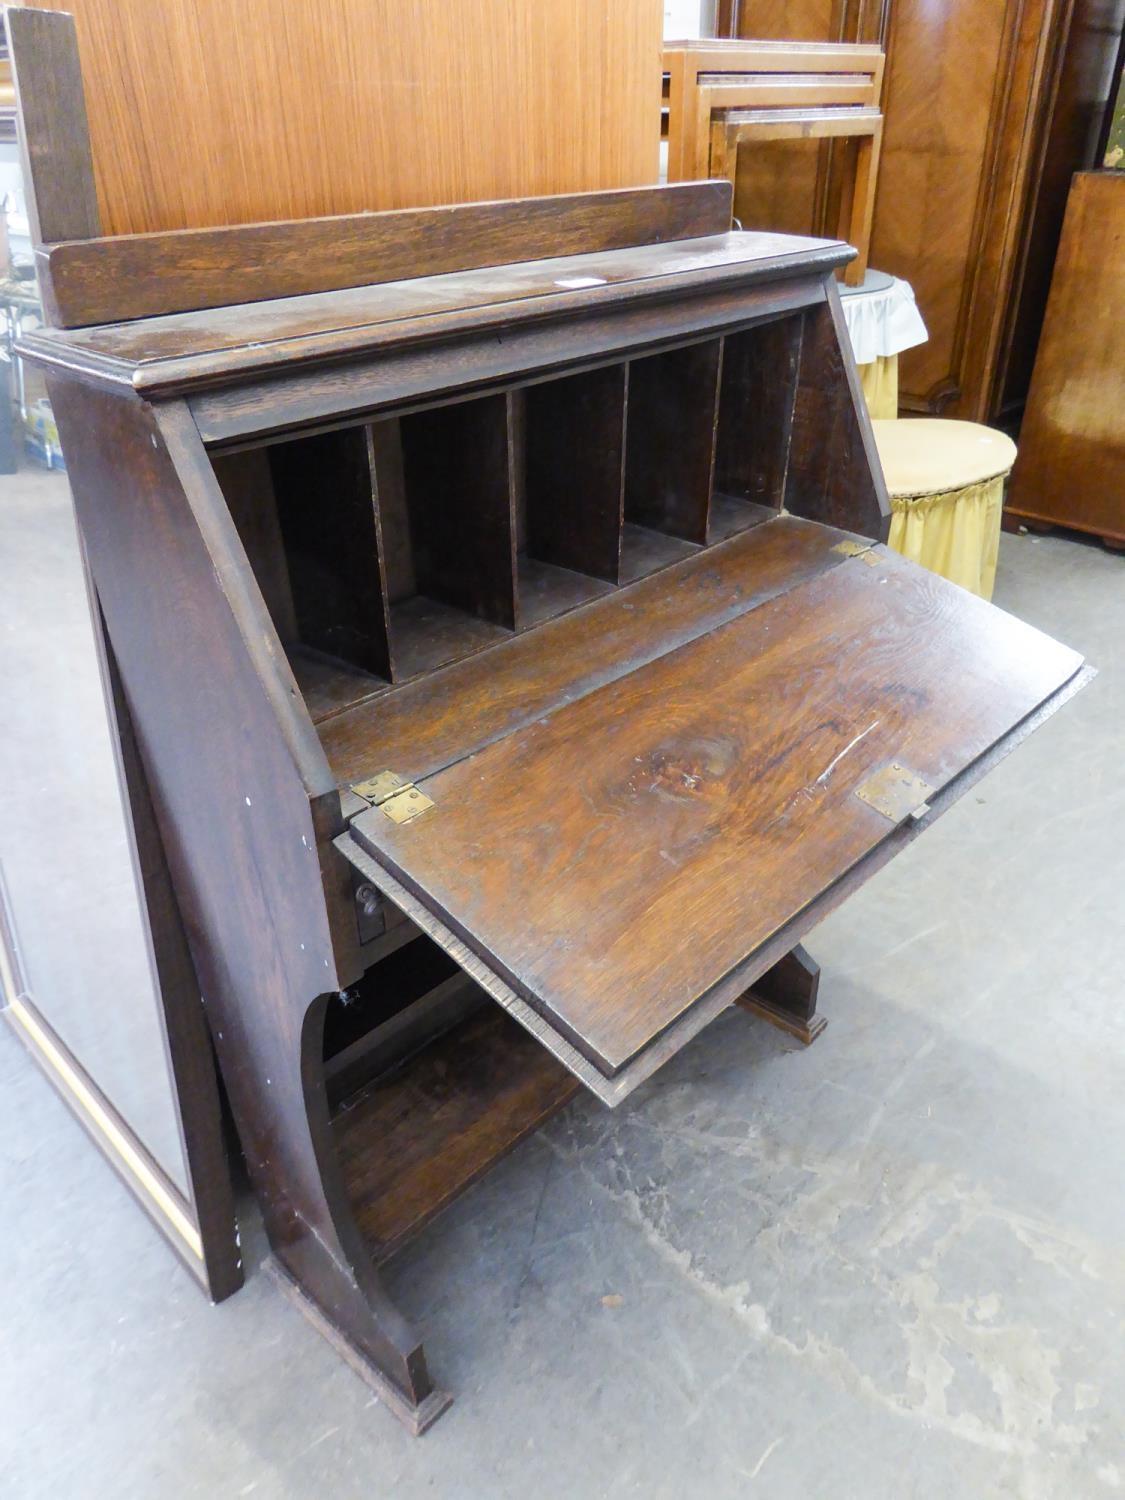 AN OAK BUREAU WITH UPRIGHT FALL-FRONT, TWO OPEN BOOKSHELVES BELOW, 2?6? WIDE - Image 2 of 2